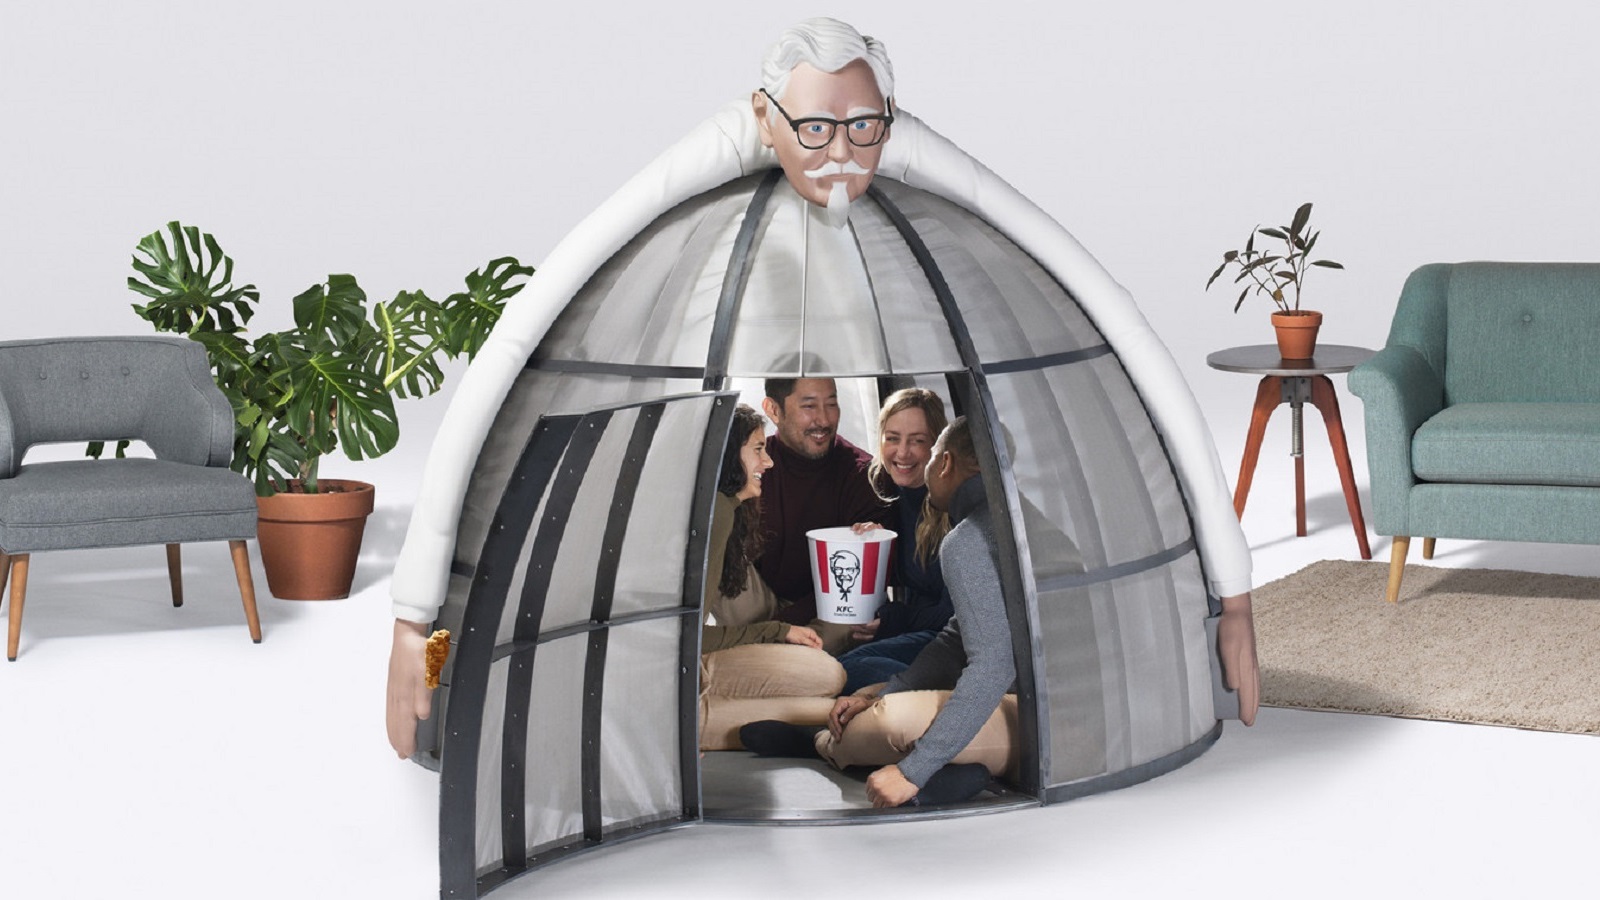 Get KFC’s Anti-Technology Shield for a Bargain on Cyber Monday!